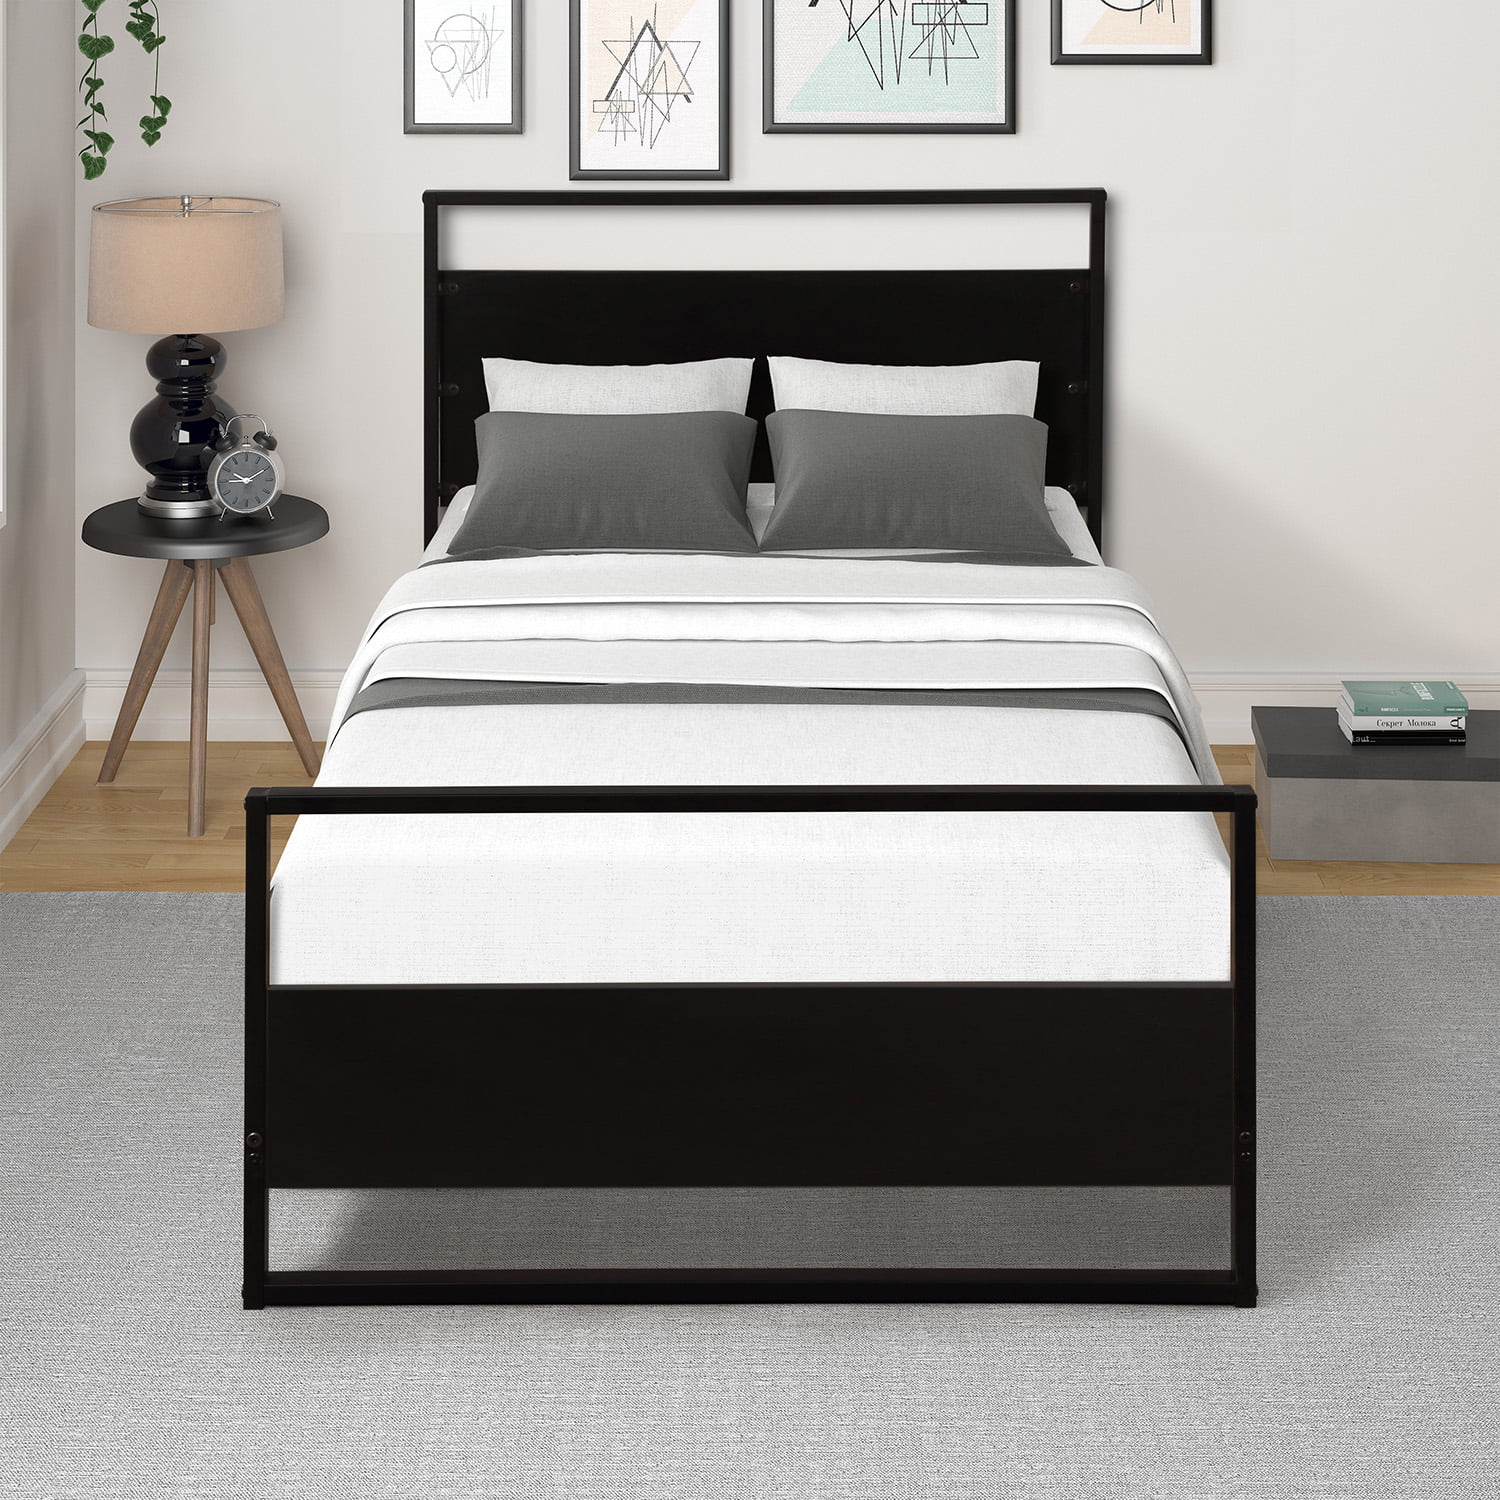 Twin Metal Bed Frame Black, Twin Xl Metal Bed Frame With Headboard And Footboard